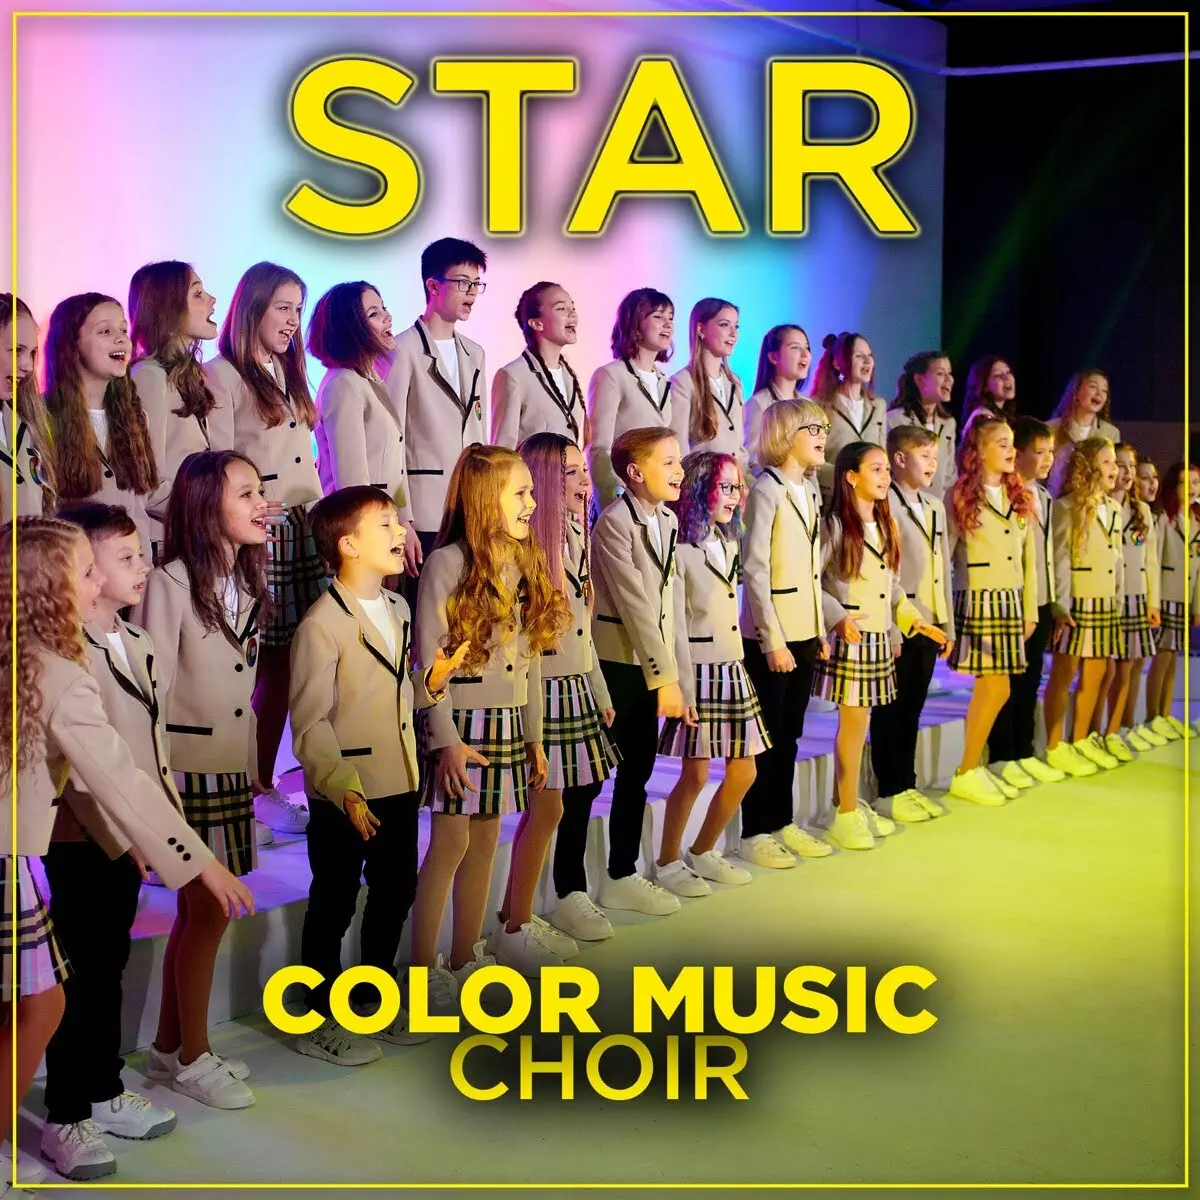 Together - Single by Color Music Choir on Apple Music